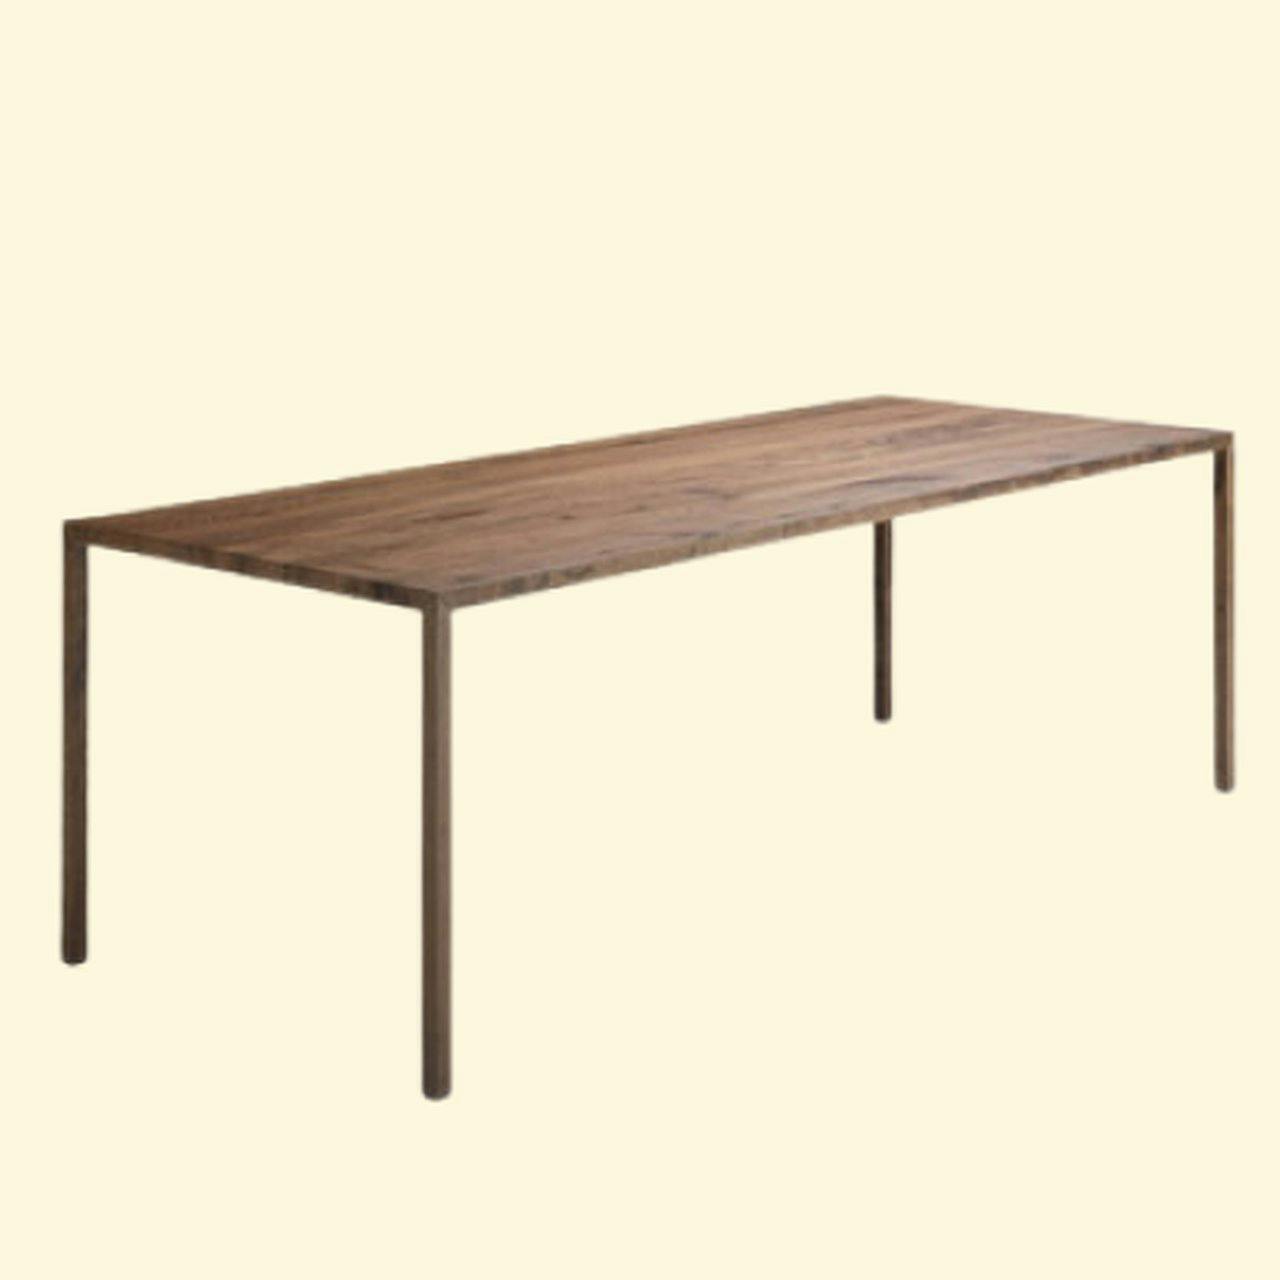 Ole Wanscher Dining tables